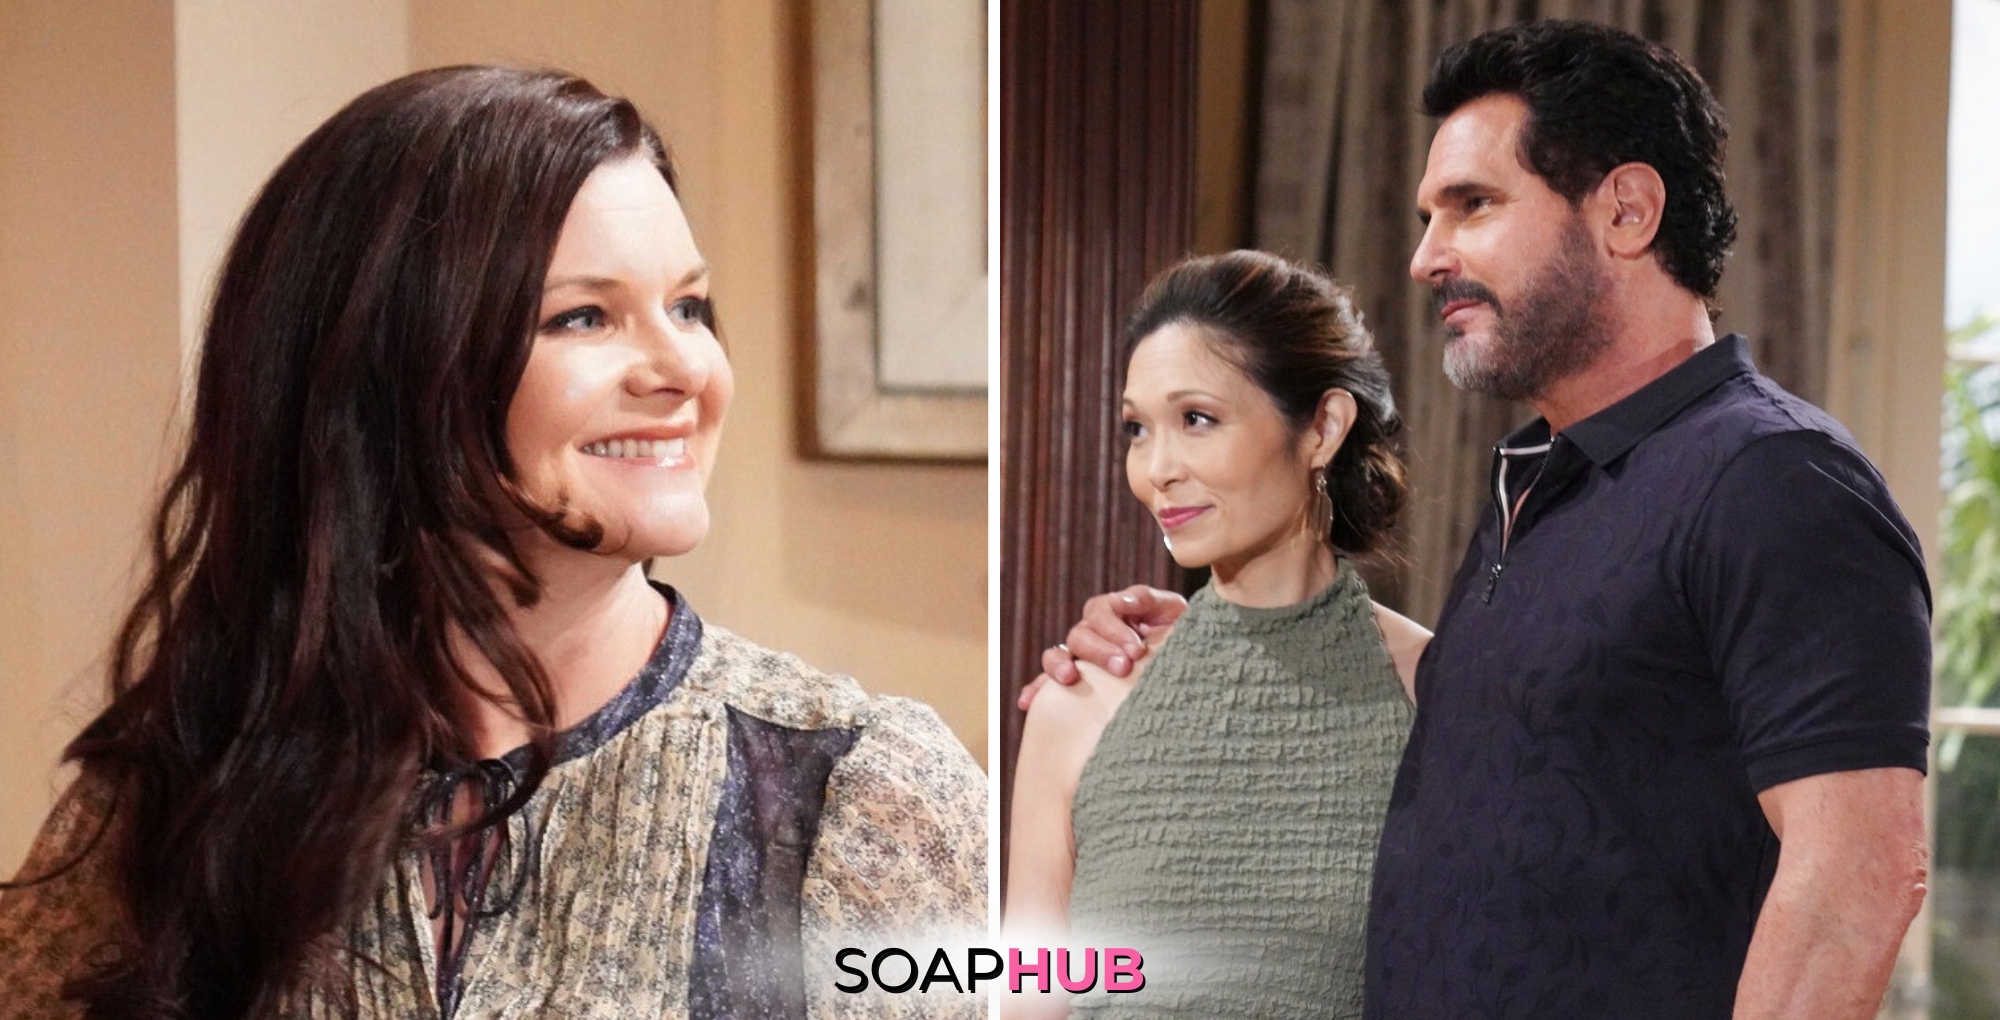 Bold and the Beautiful Spoilers for Friday, June 14, Episode 9294 Features Katie, Poppy and Bill with the Soap Hub Logo Across the Bottom.